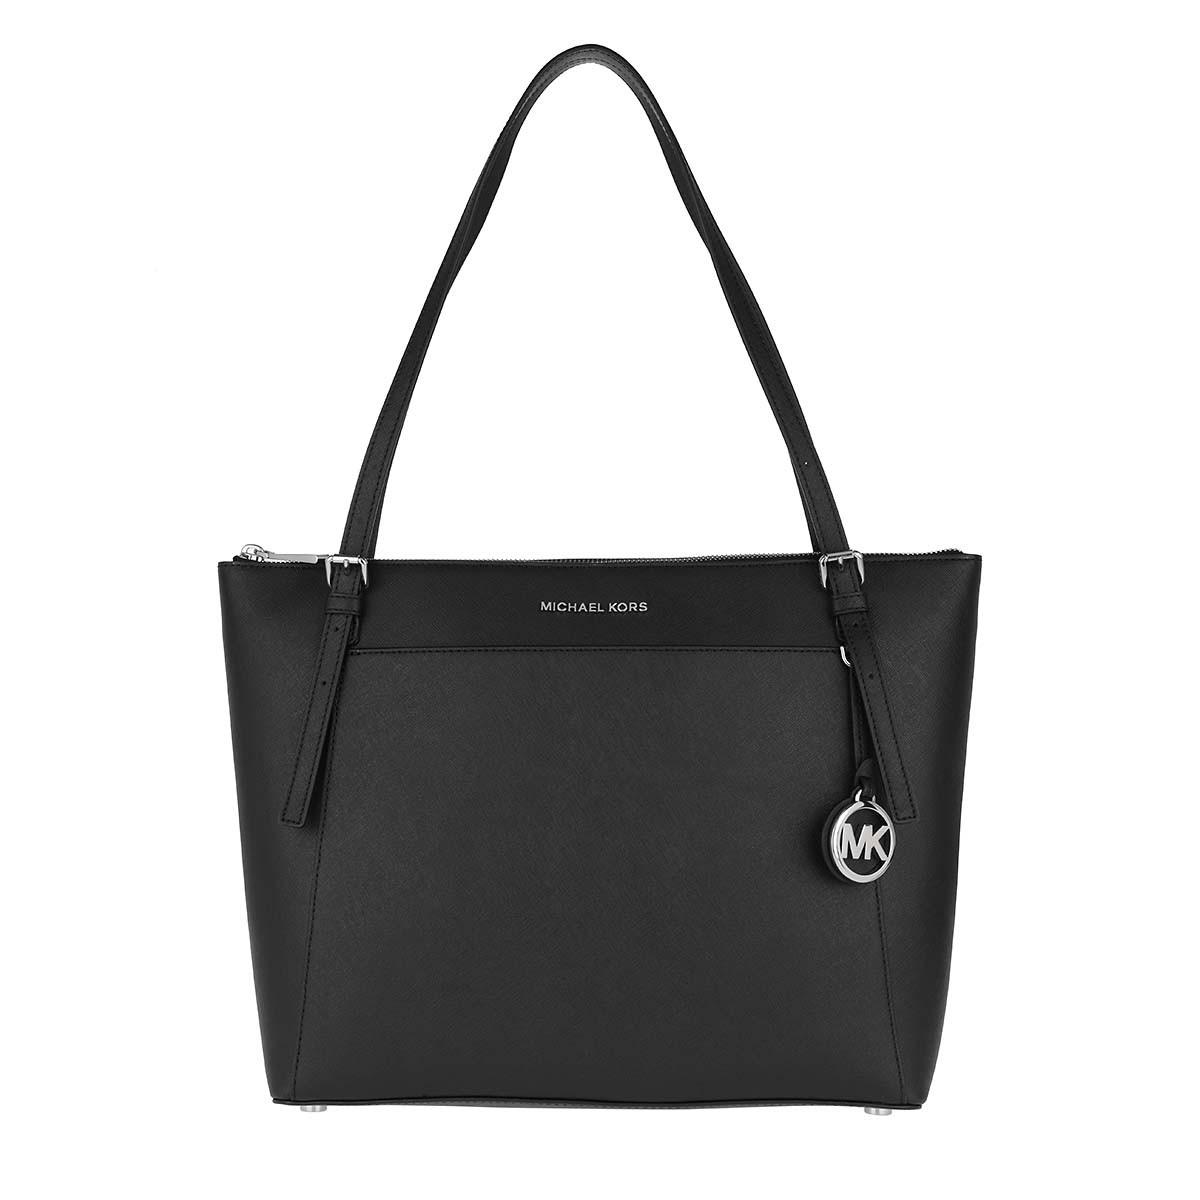 Michael Kors Voyager Large Saffiano Leather Top-zip Tote Bag in Black ...